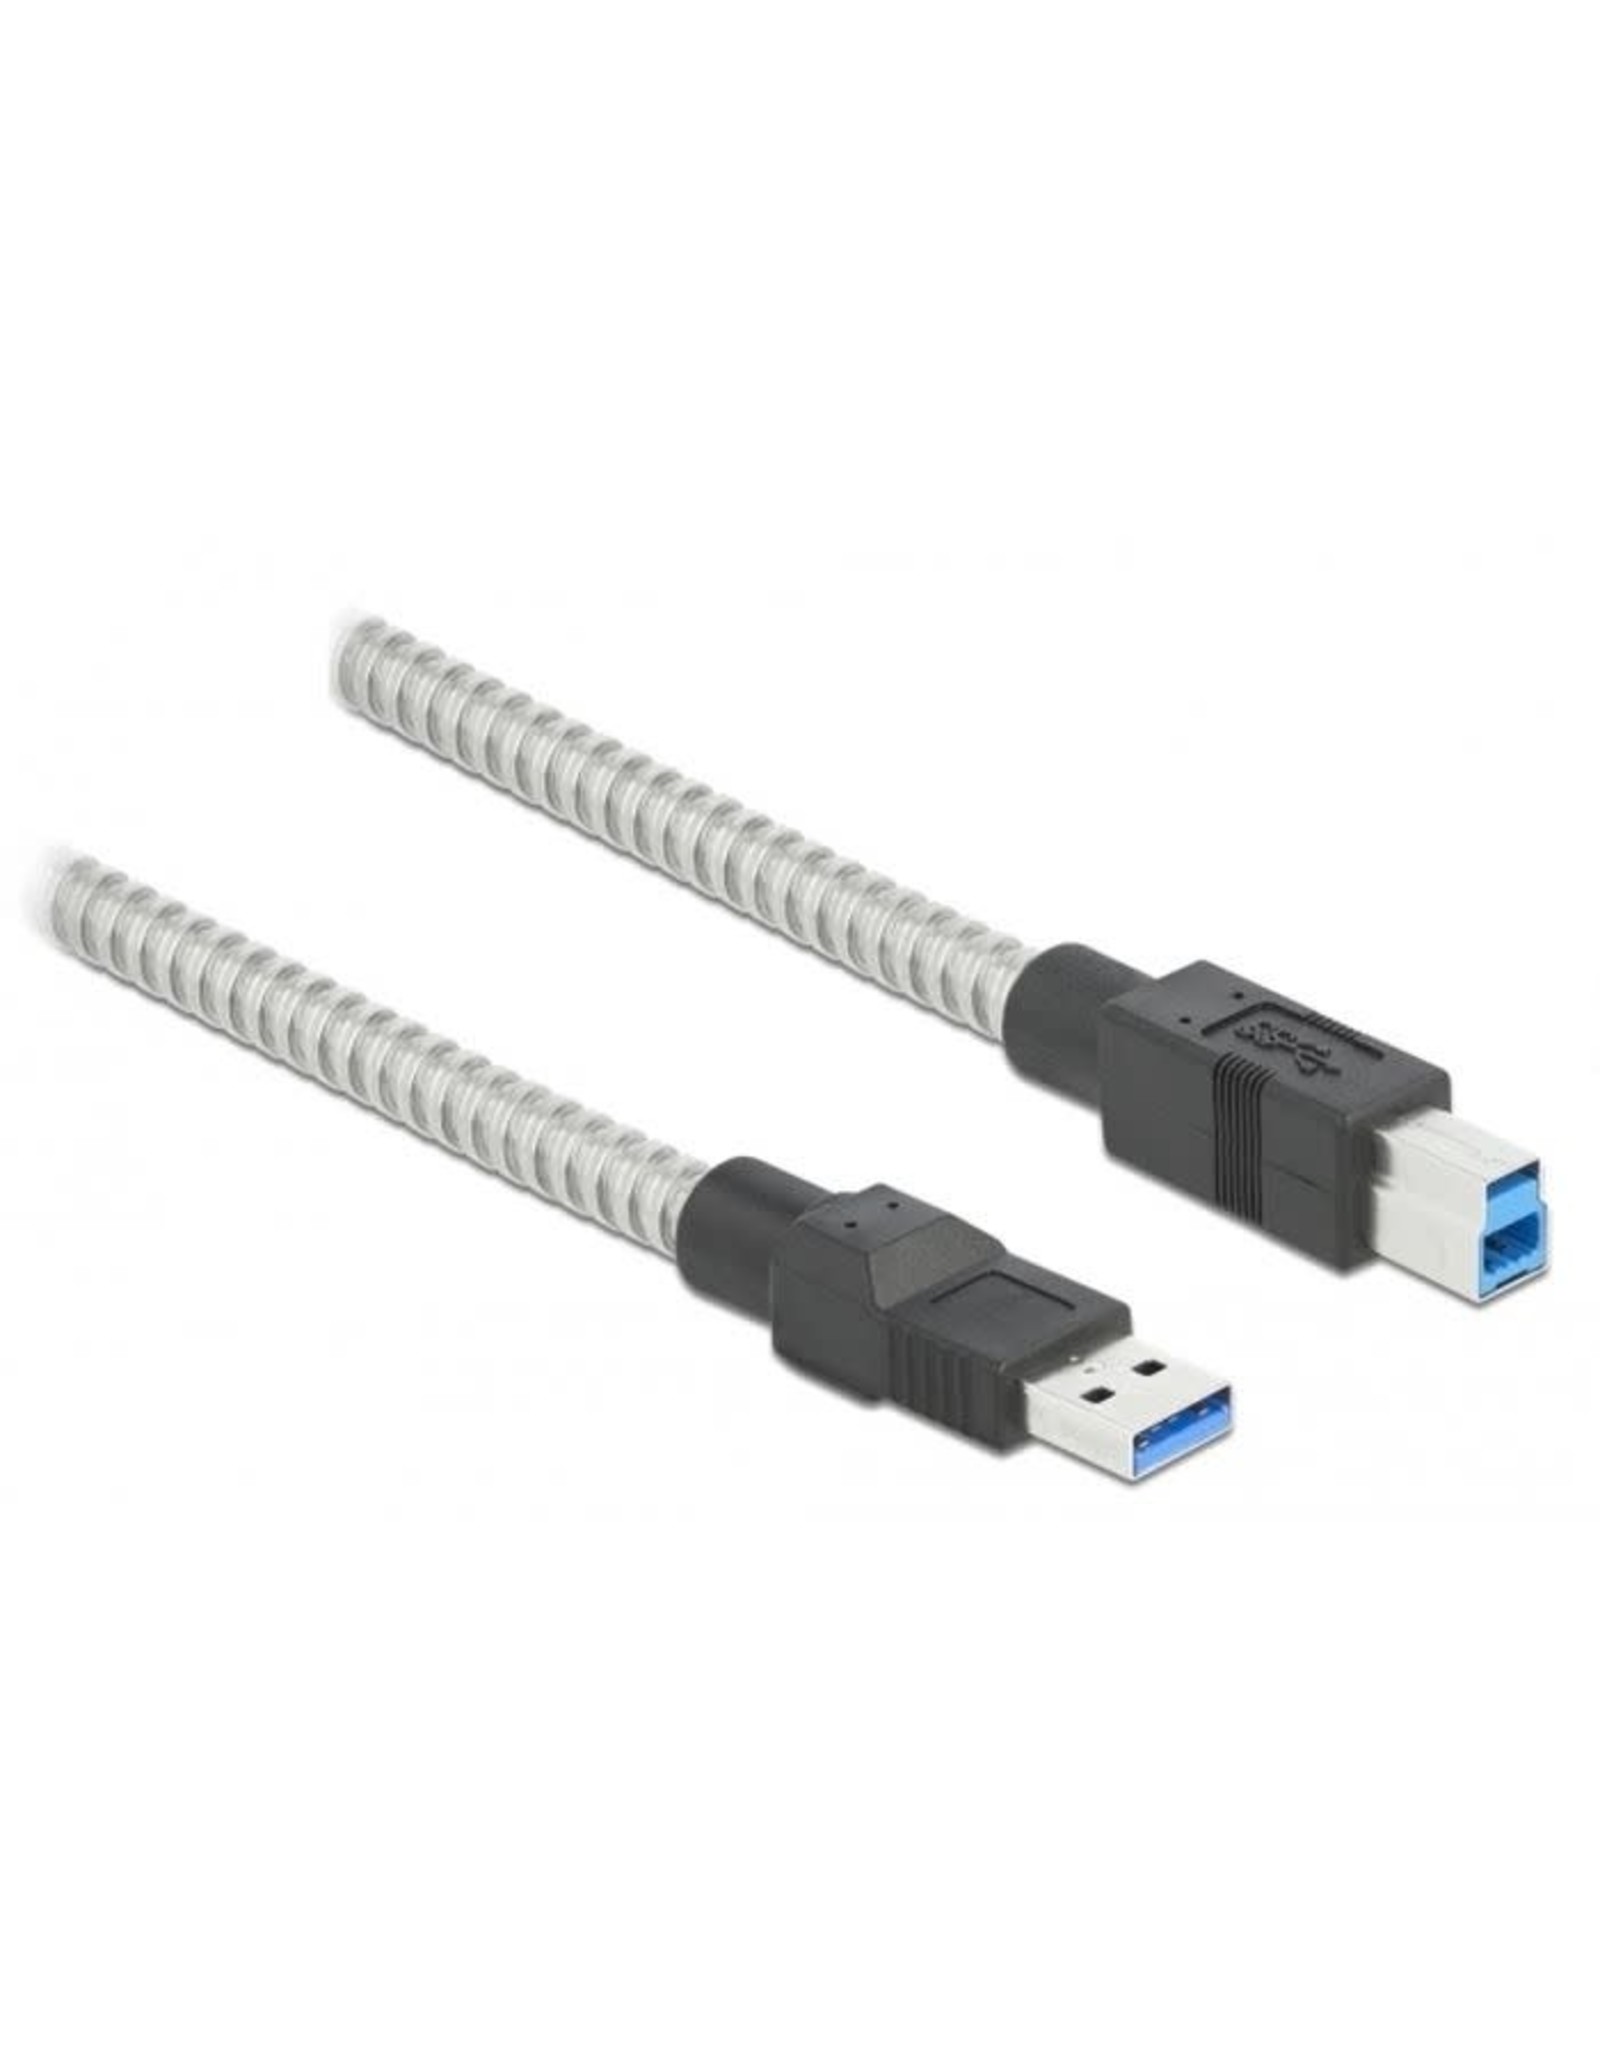 Pegasus Astro Pegasus Astro 1 m USB 3.0 Cable Type-A Male to Type-B Male with Metal Jacket